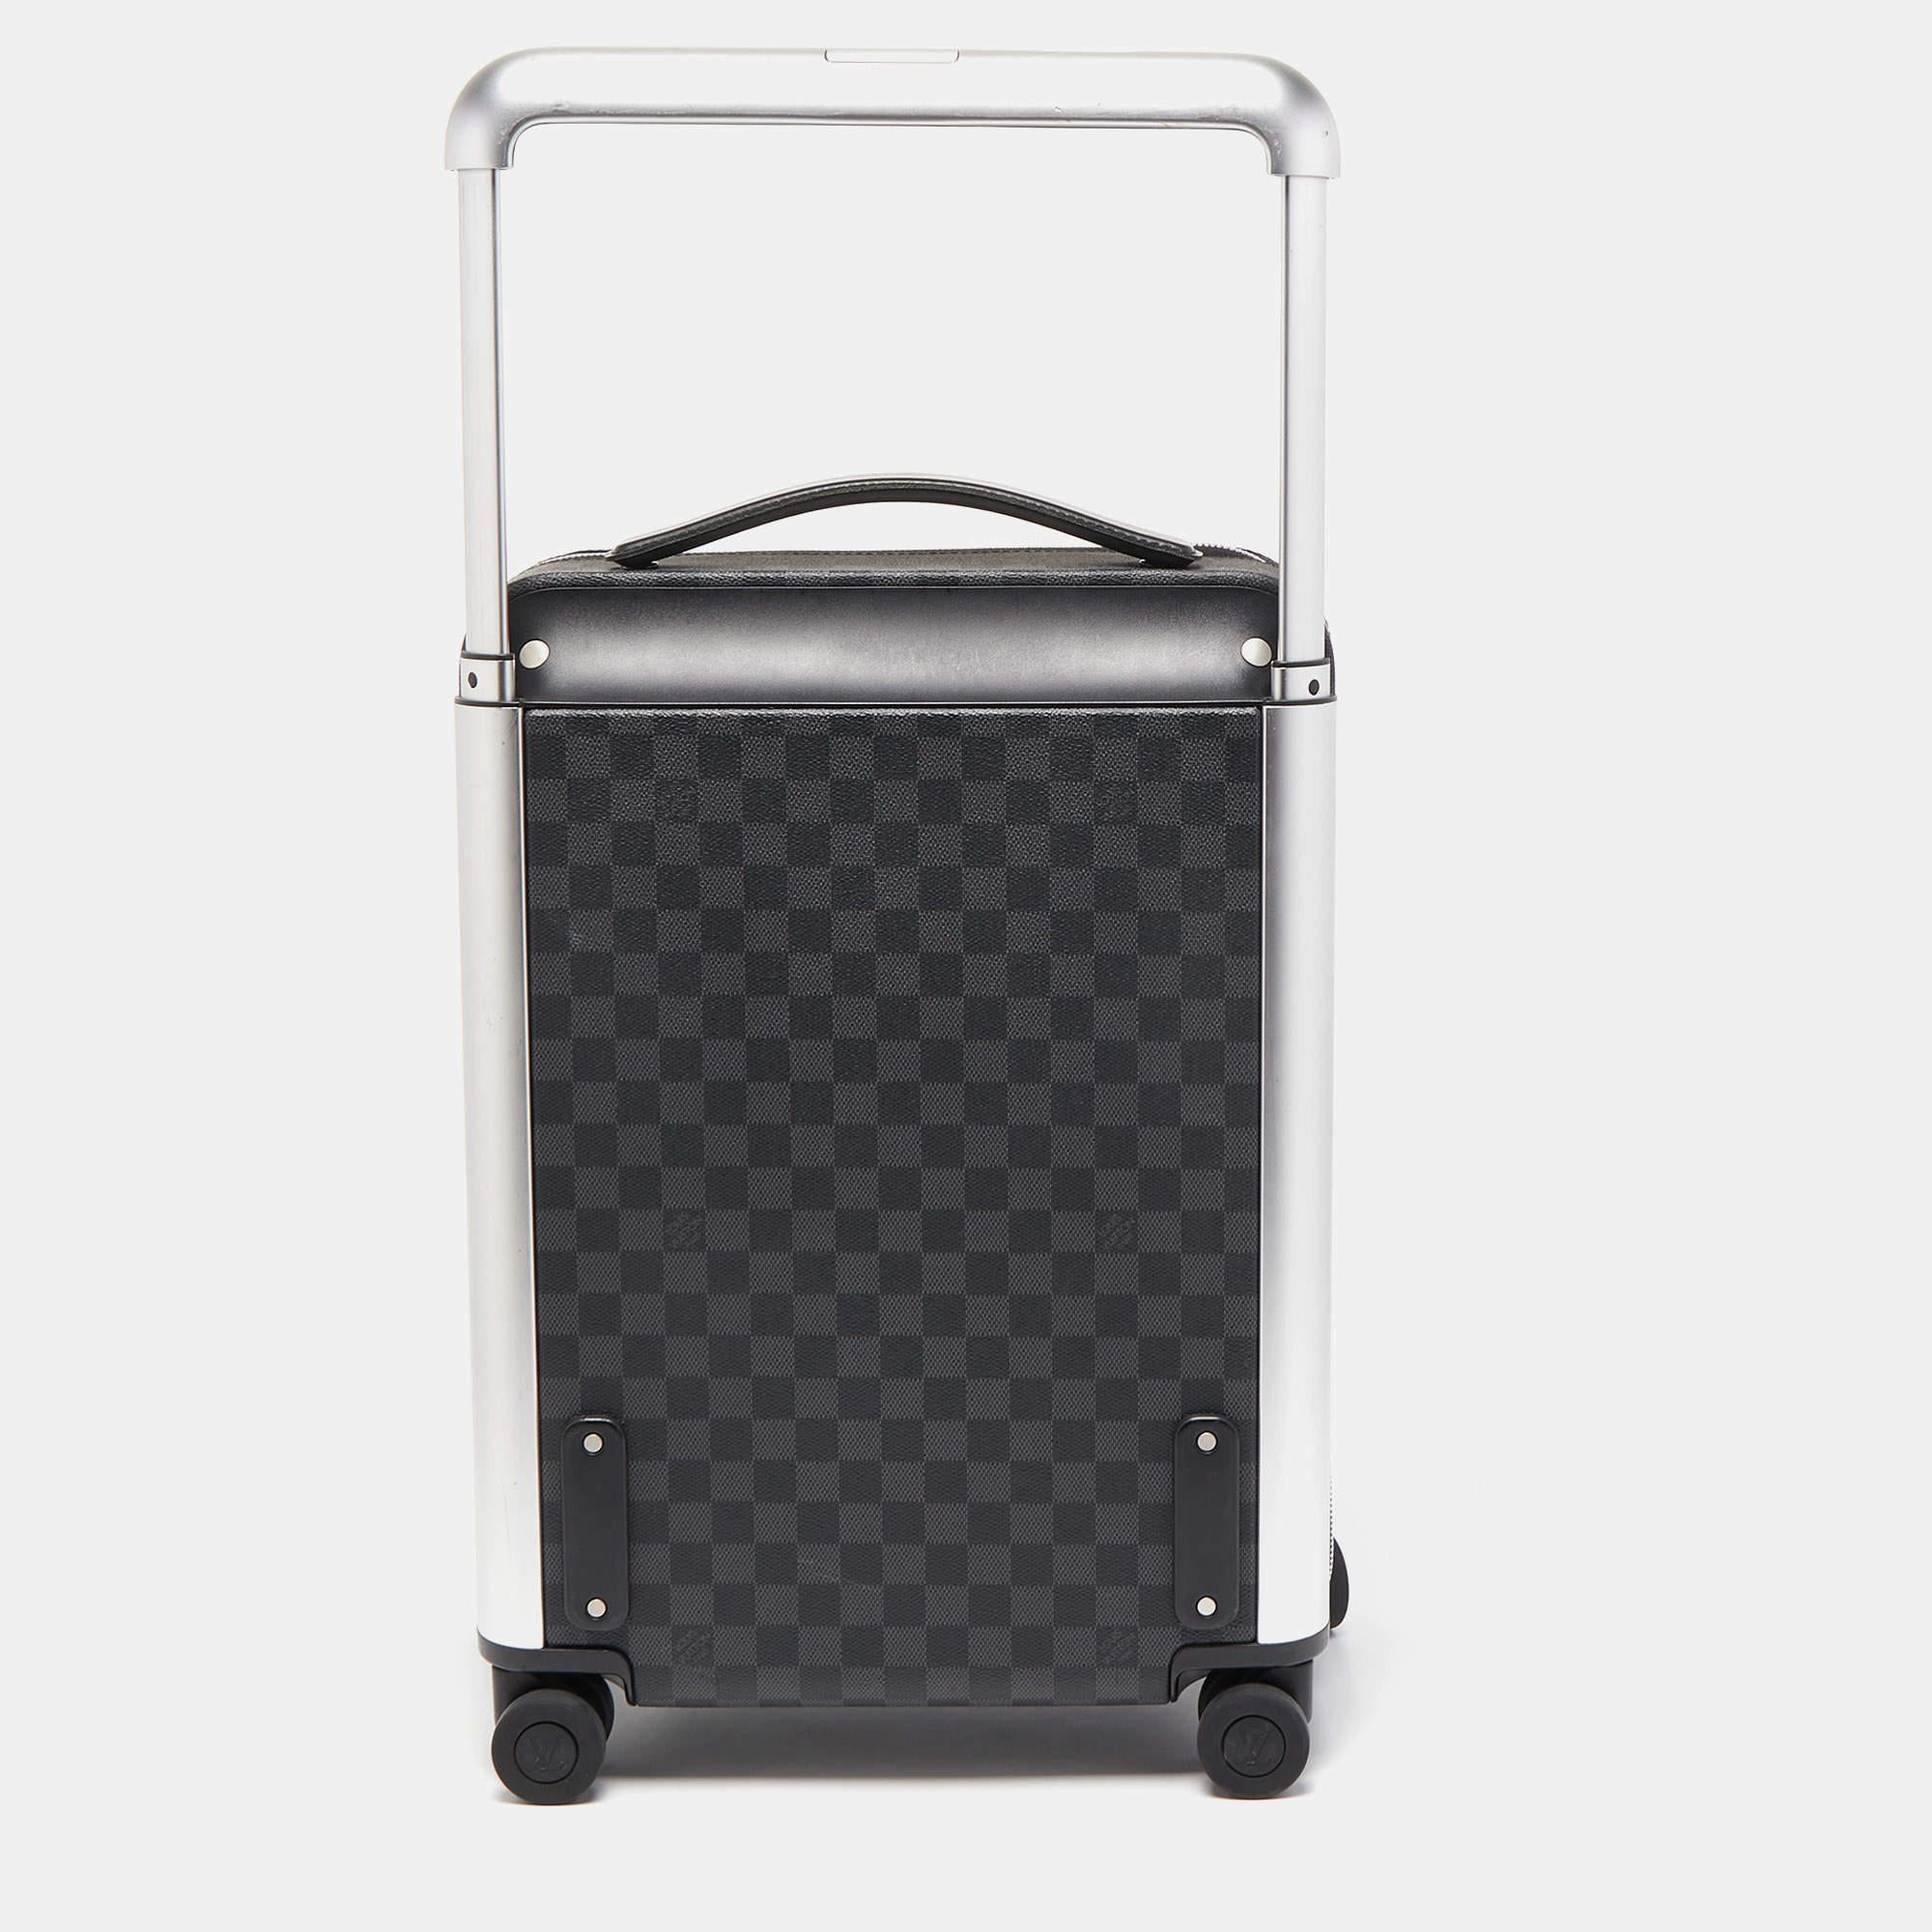 This Horizon 50 luggage case from the house of Louis Vuitton is an accessory you will turn to when you have travel plans. It has been crafted using the best kind of materials to be appealing as well as durable. It's a worthy investment.

Includes: